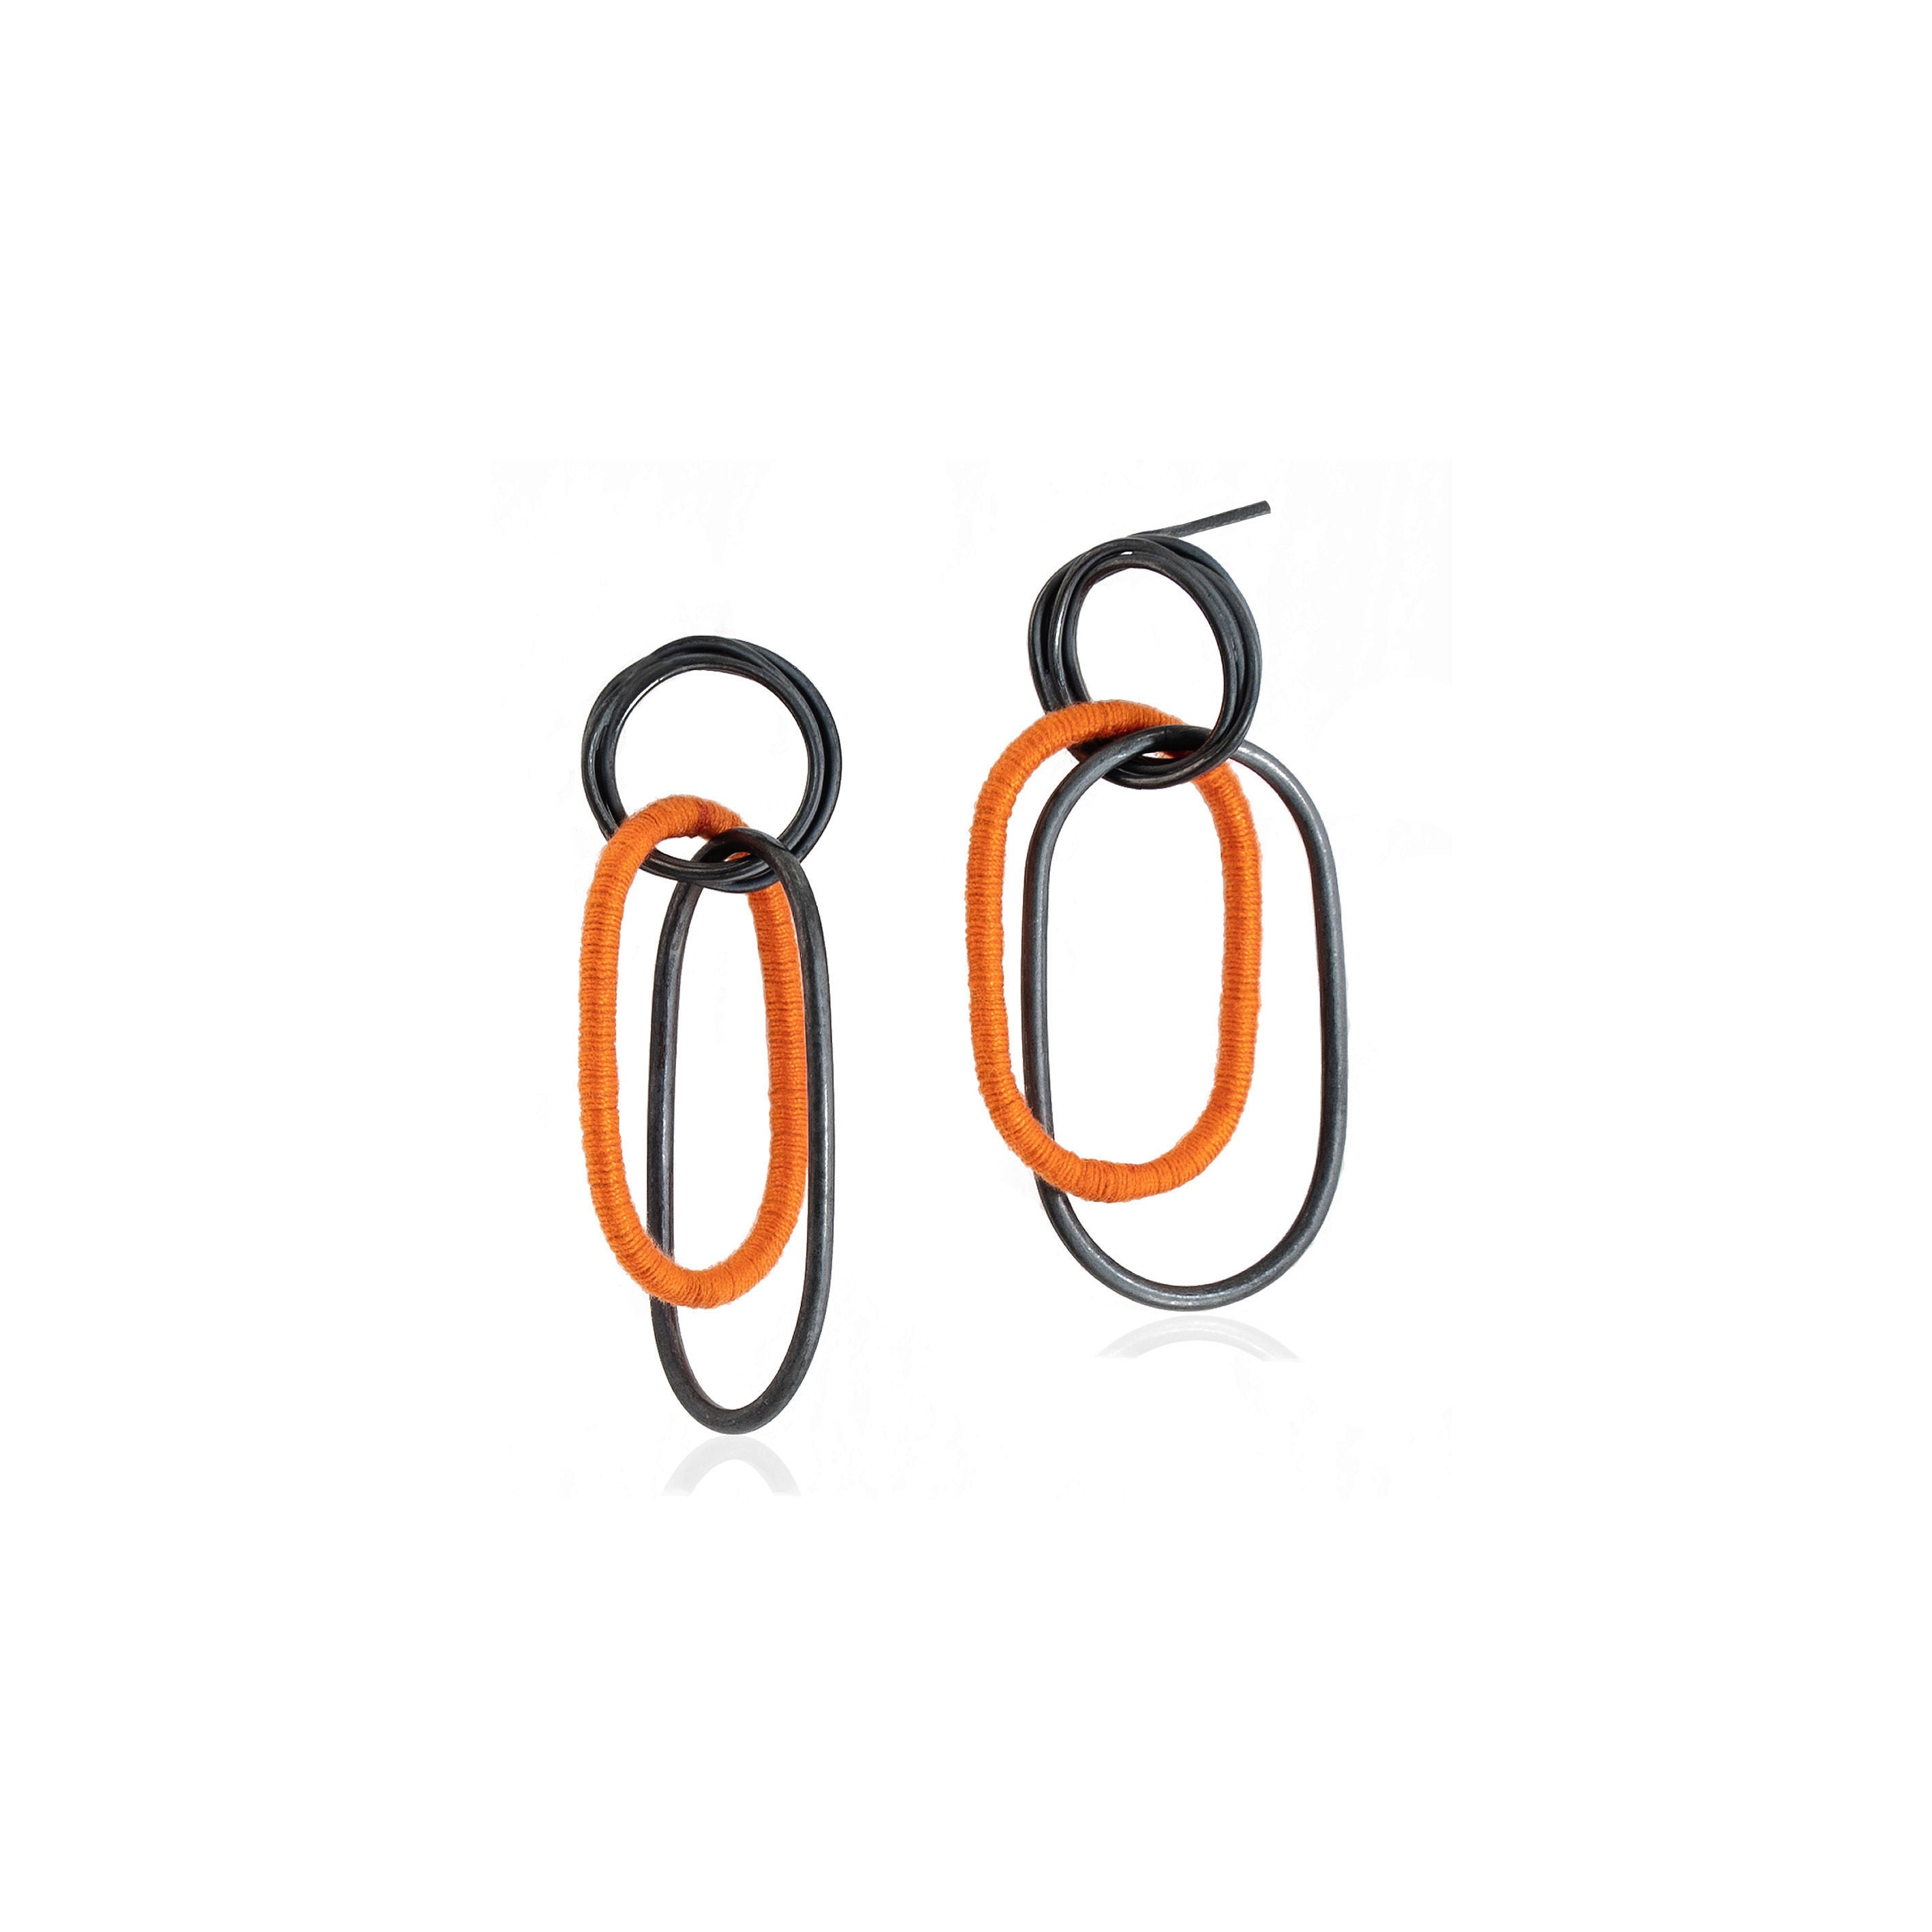 Oxidized Sterling Silver Coiled Stud Earrings with interlocking wire dangles, with one dangle wrapped in orange cotton thread are handmade in Adelaide, South Australia by Melissa Gillespie Jewellery